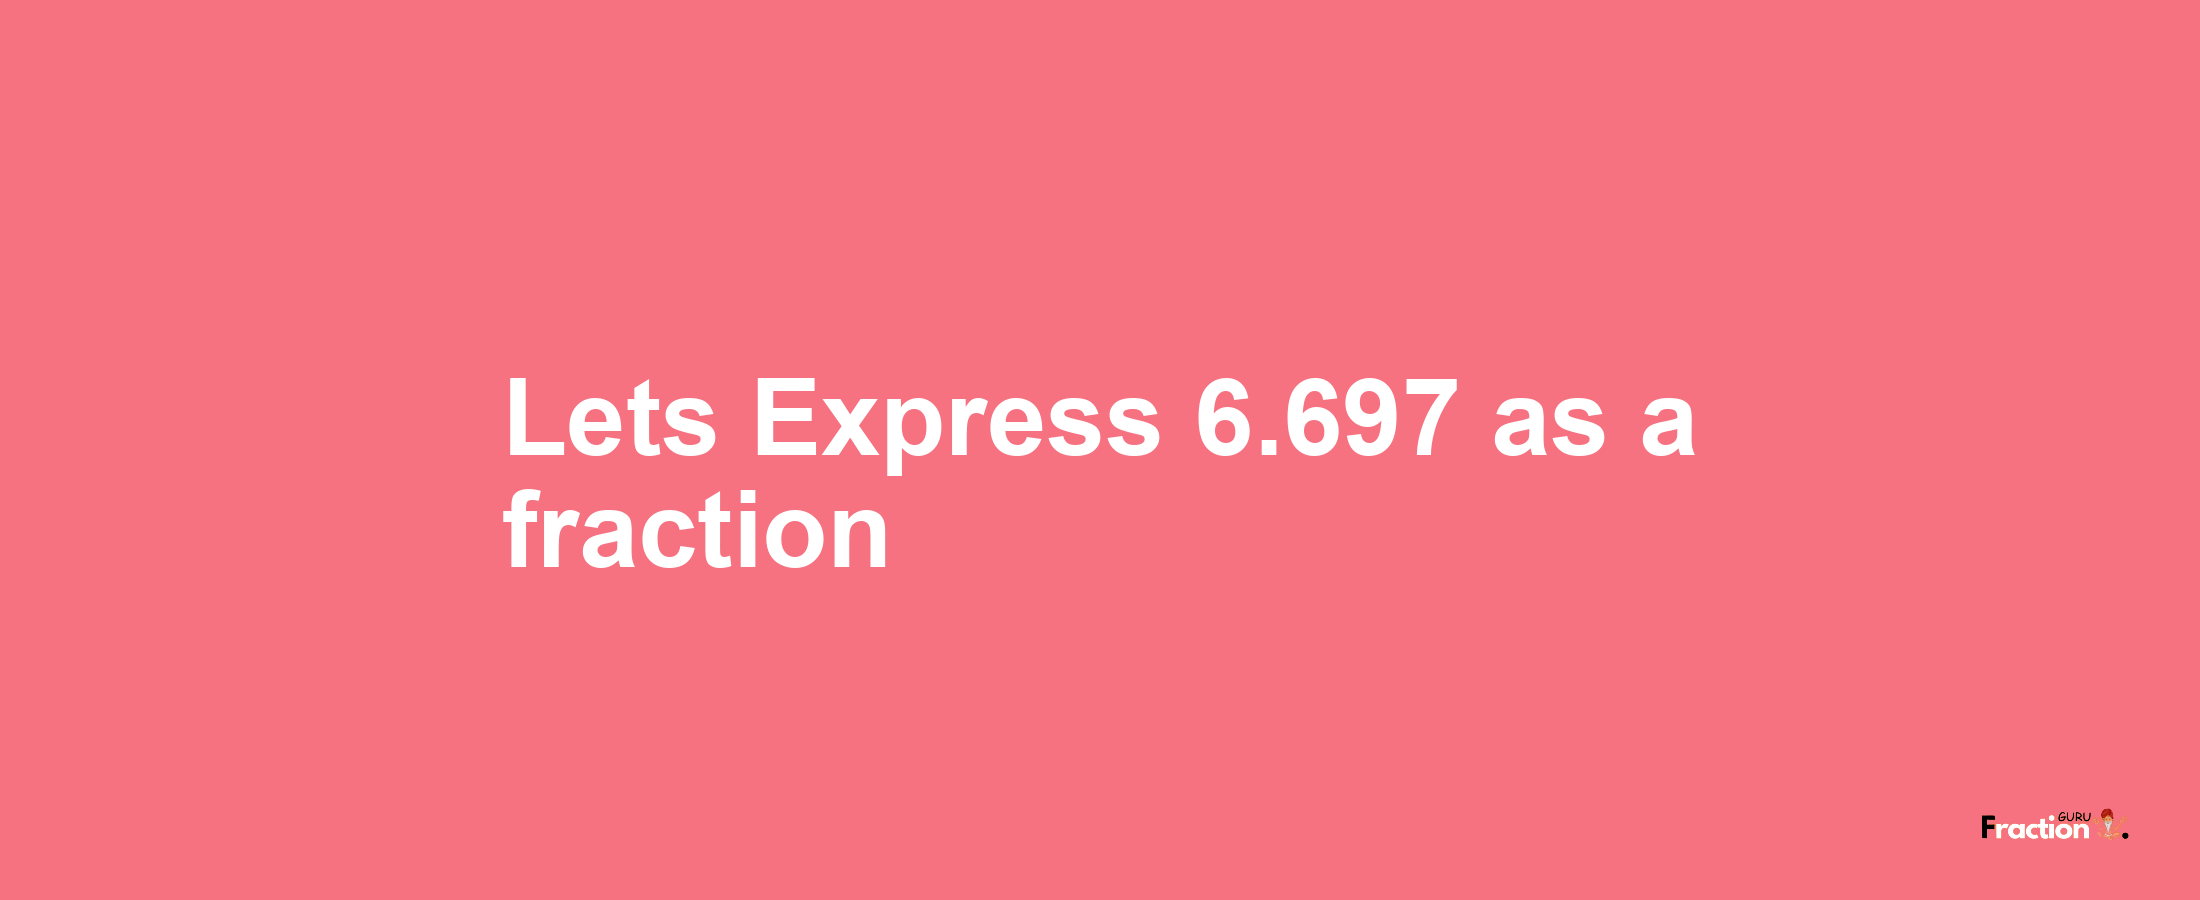 Lets Express 6.697 as afraction